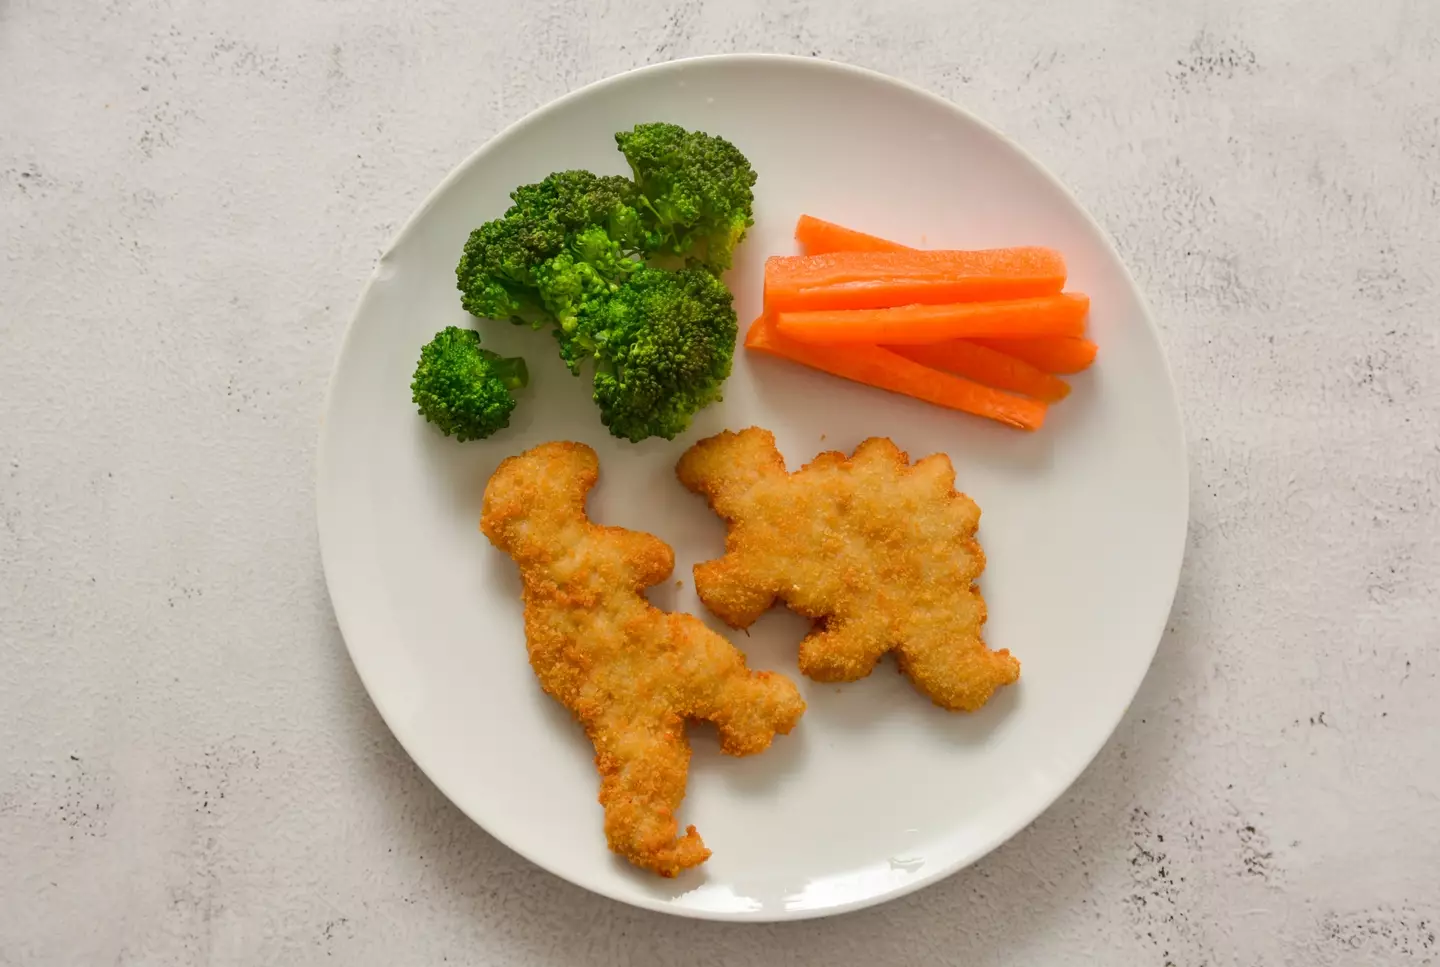 Turkey dinosaurs, not quite the same thing and less likely to be eaten for Christmas.